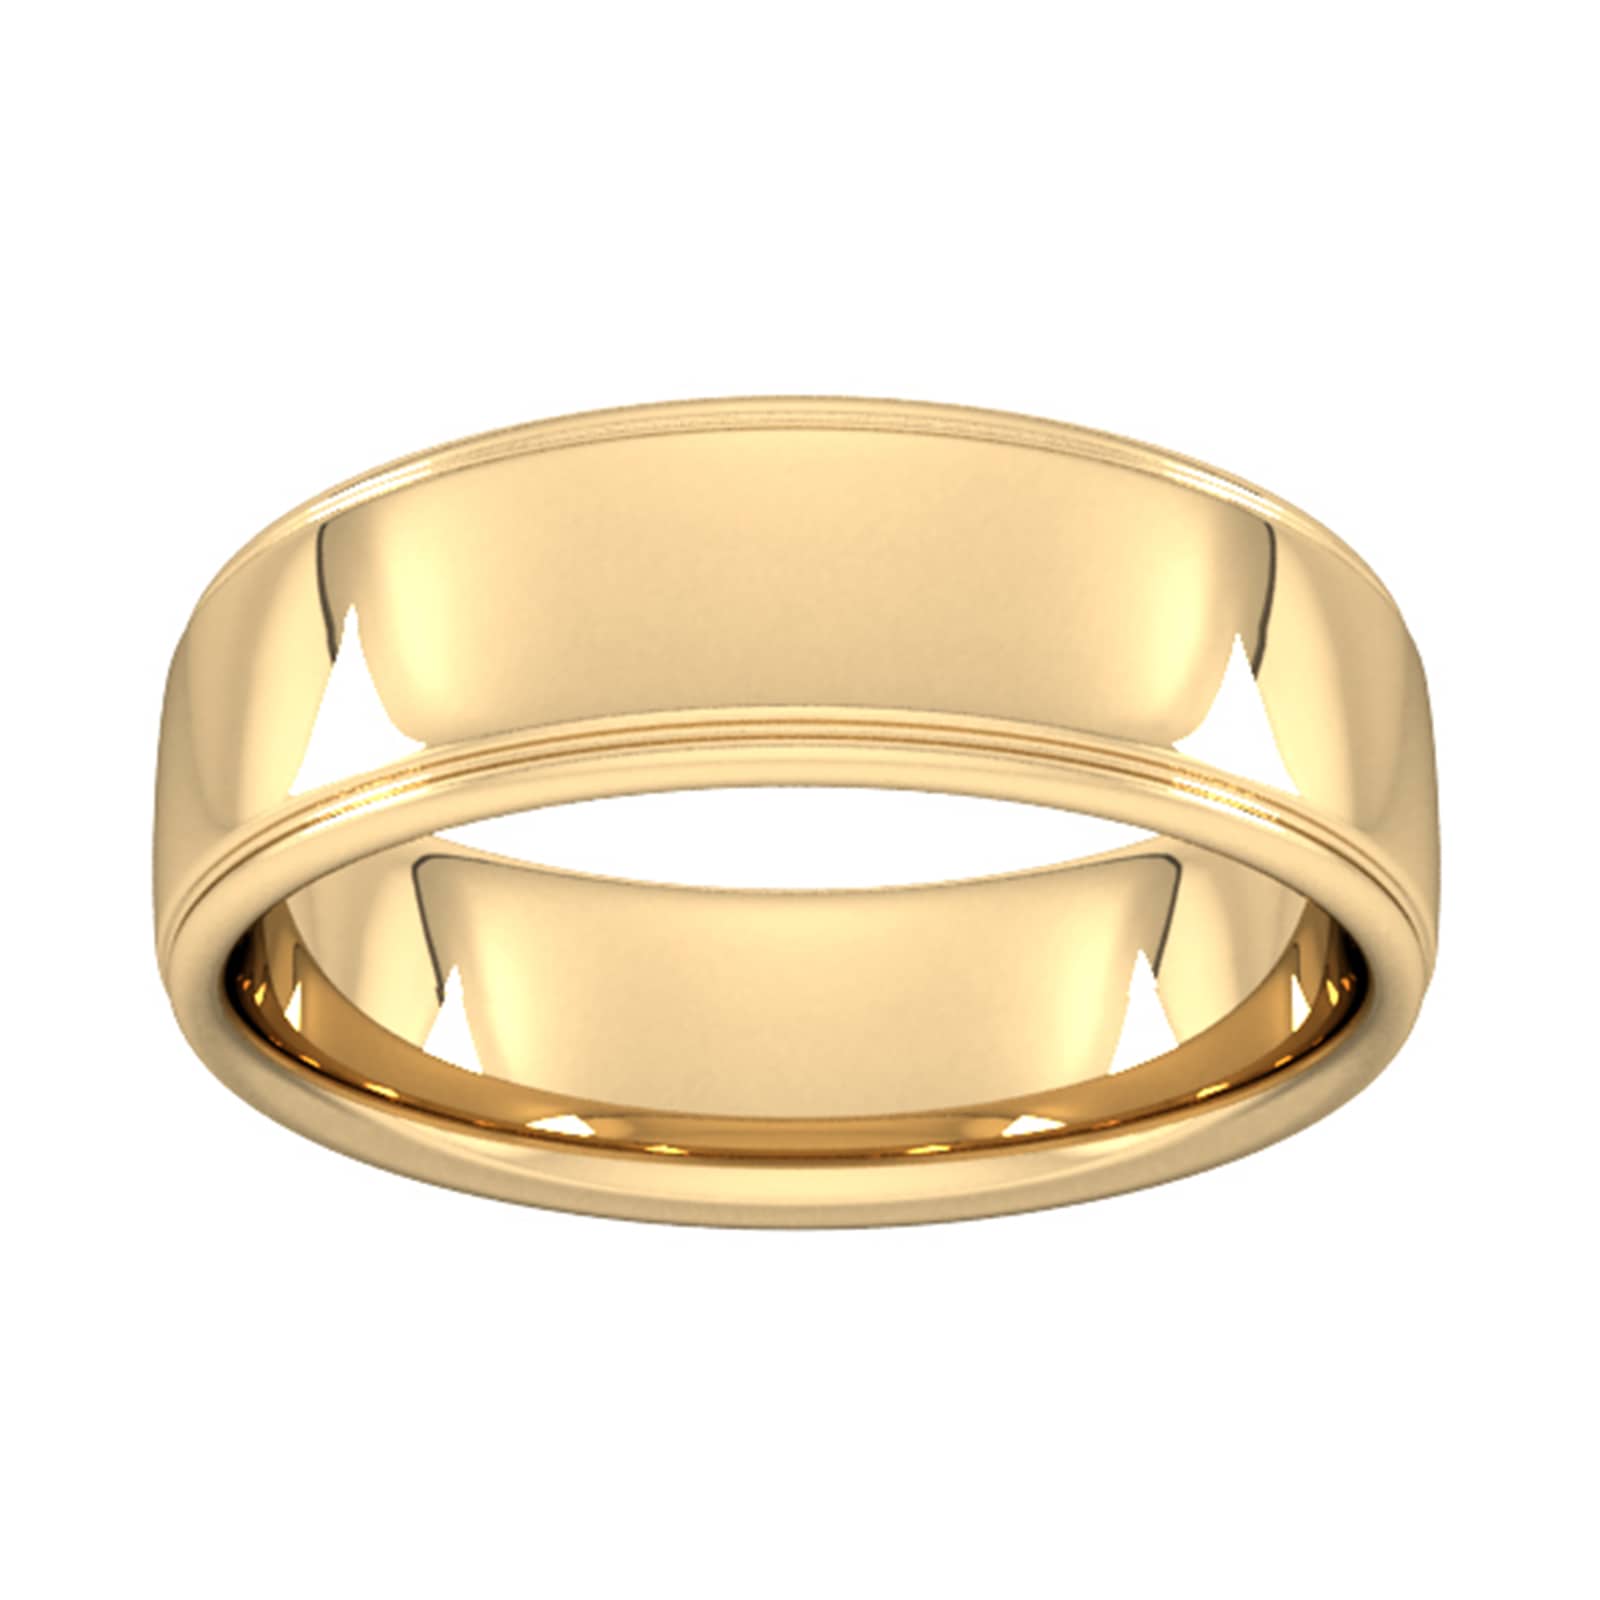 7mm Slight Court Standard Polished Finish With Grooves Wedding Ring In 18 Carat Yellow Gold - Ring Size H